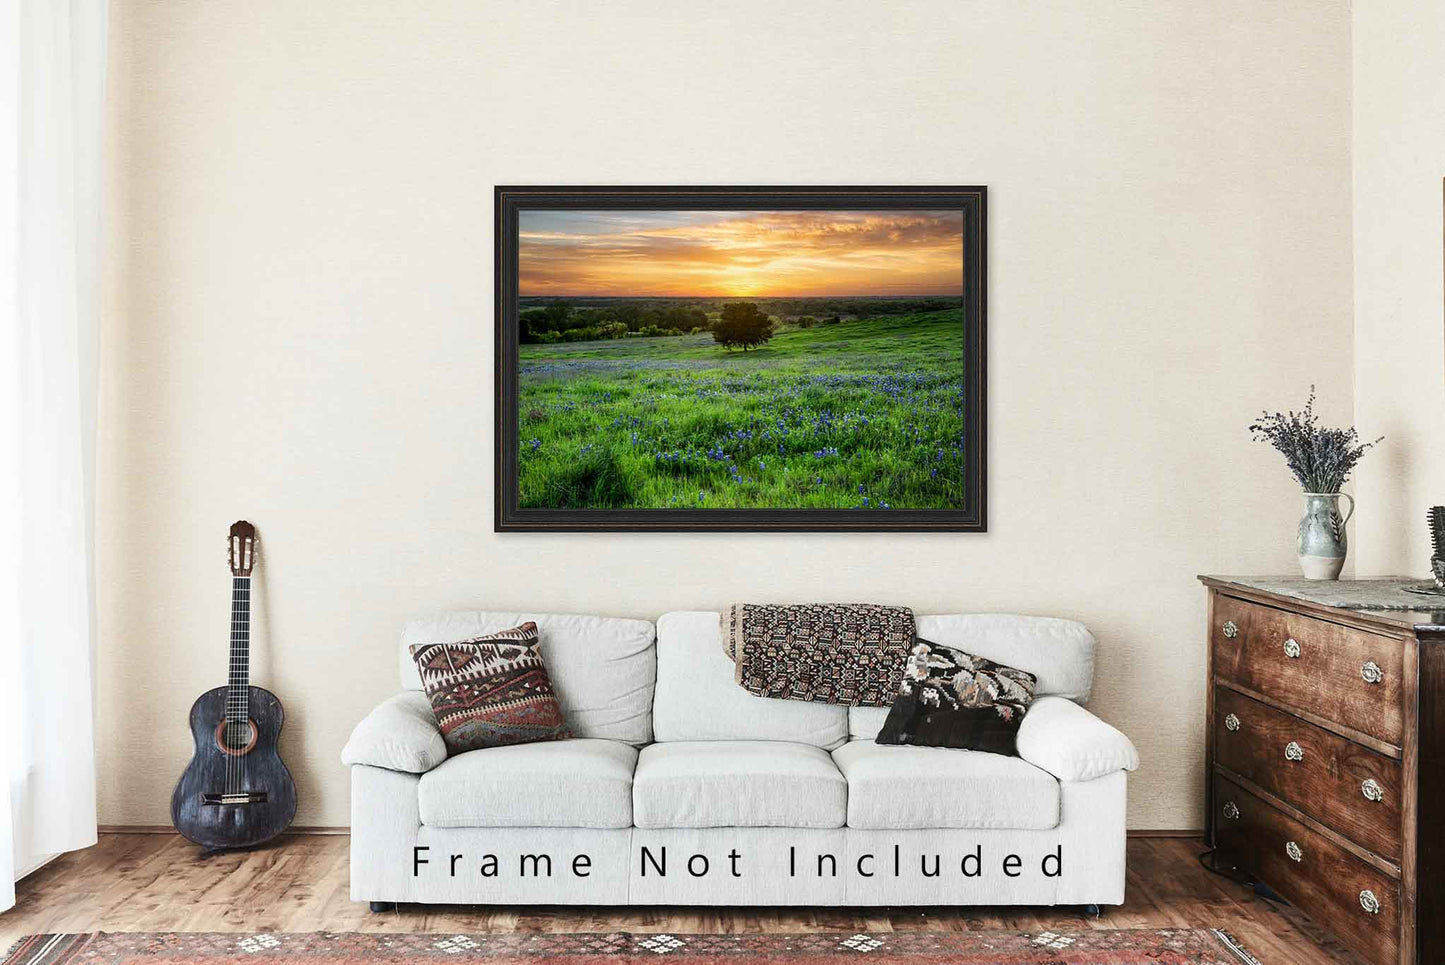 Country Photo Print | Lone Tree in Field of Texas Bluebonnets Picture | Wildflower Wall Art | Landscape Photography | Nature Decor